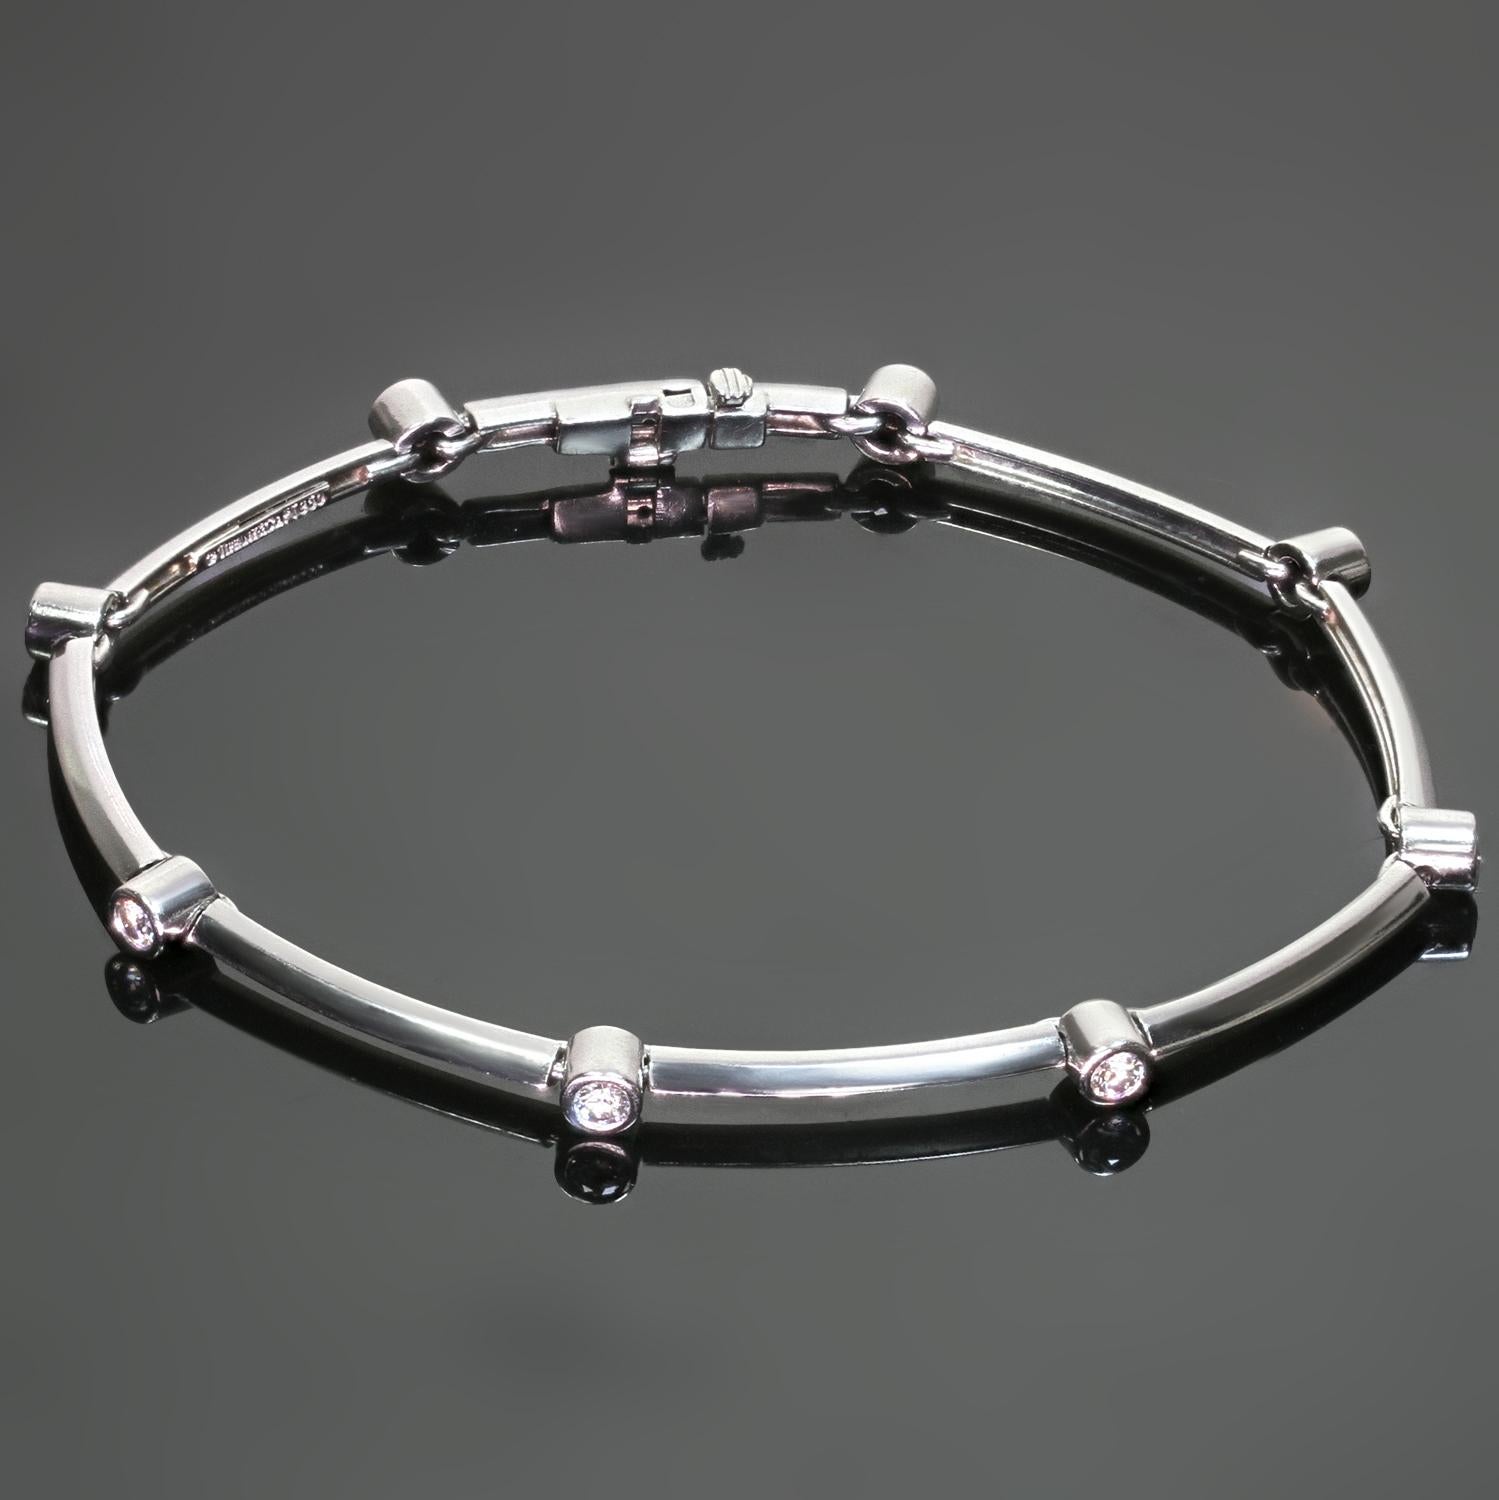 This classic Tiffany & Co. bracelet is crafted in platinum and features slender bars alternating with bezel-set with round brilliant F-G VS1-VS2 diamonds weighing an estimated 0.60 carats. Made in United States circa 1960s. Measurements: 0.15